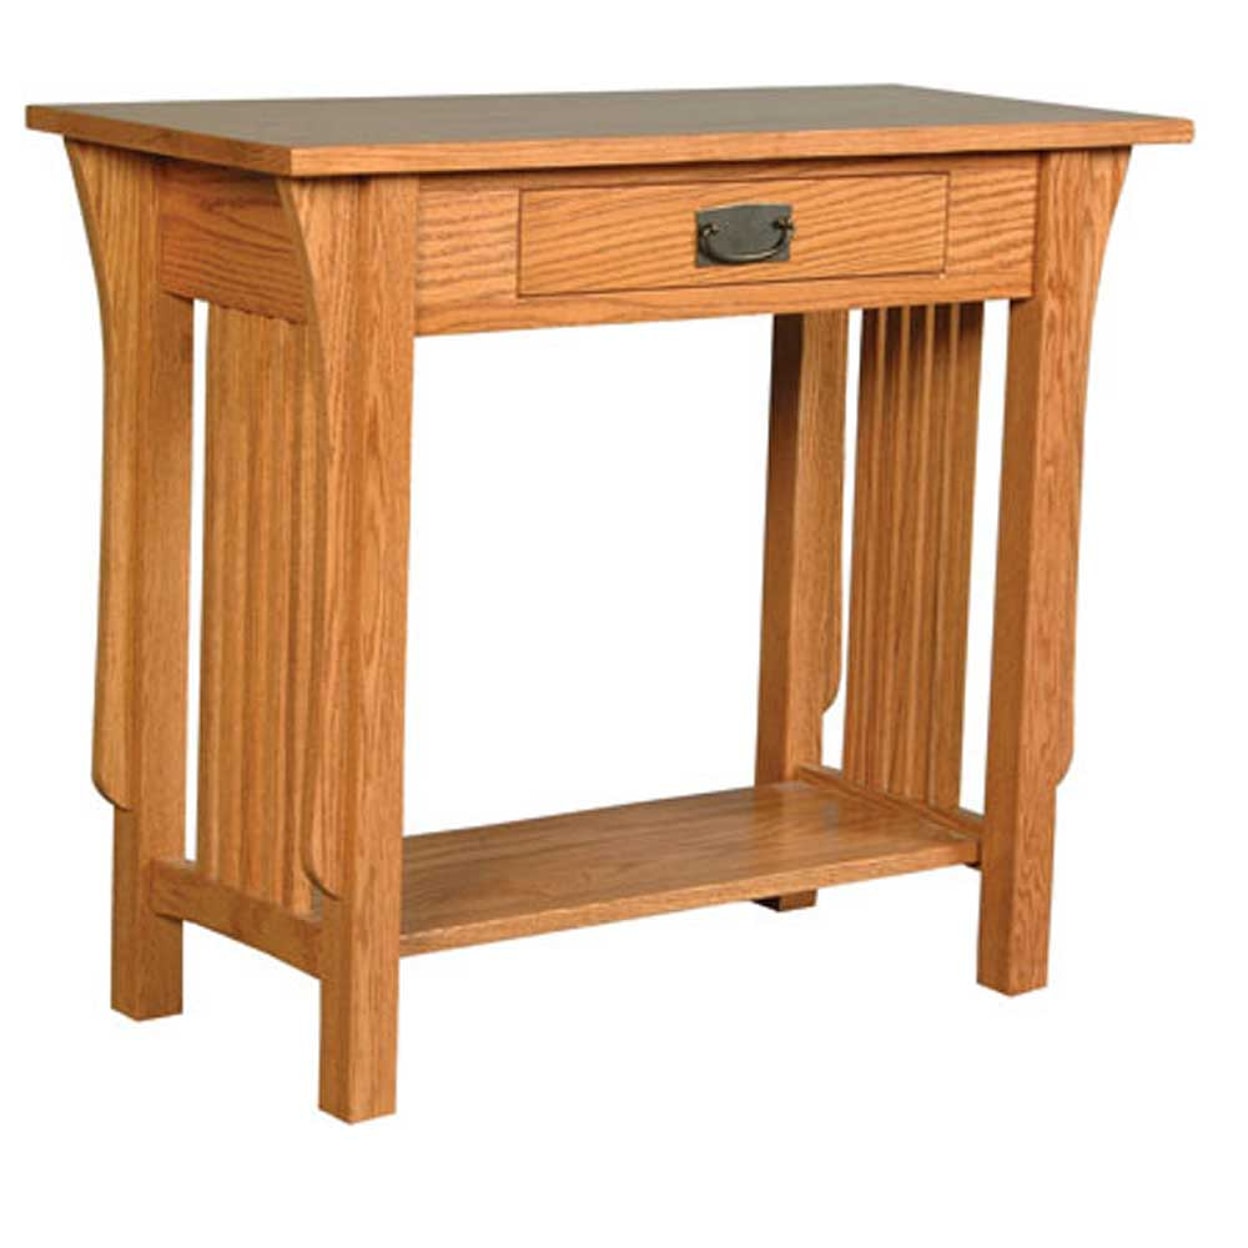 Simply Amish Prairie Mission 1-Drawer Console Table